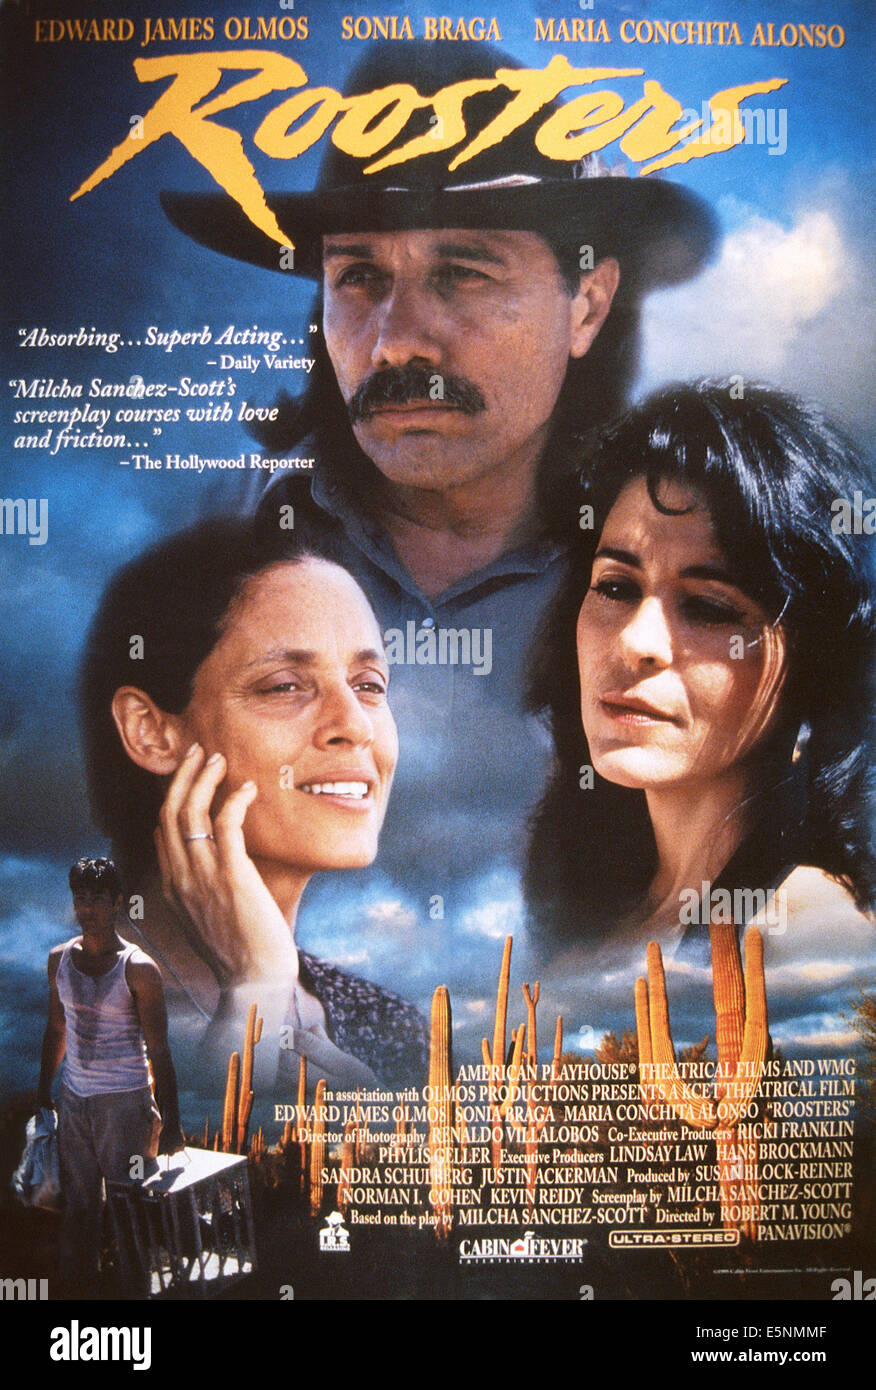 ROOSTERS, US poster, from left: Sonia Braga, Edward James Olmos, Maria Conchita Alonso, 1993, © IRS Media/courtesy Everett Stock Photo